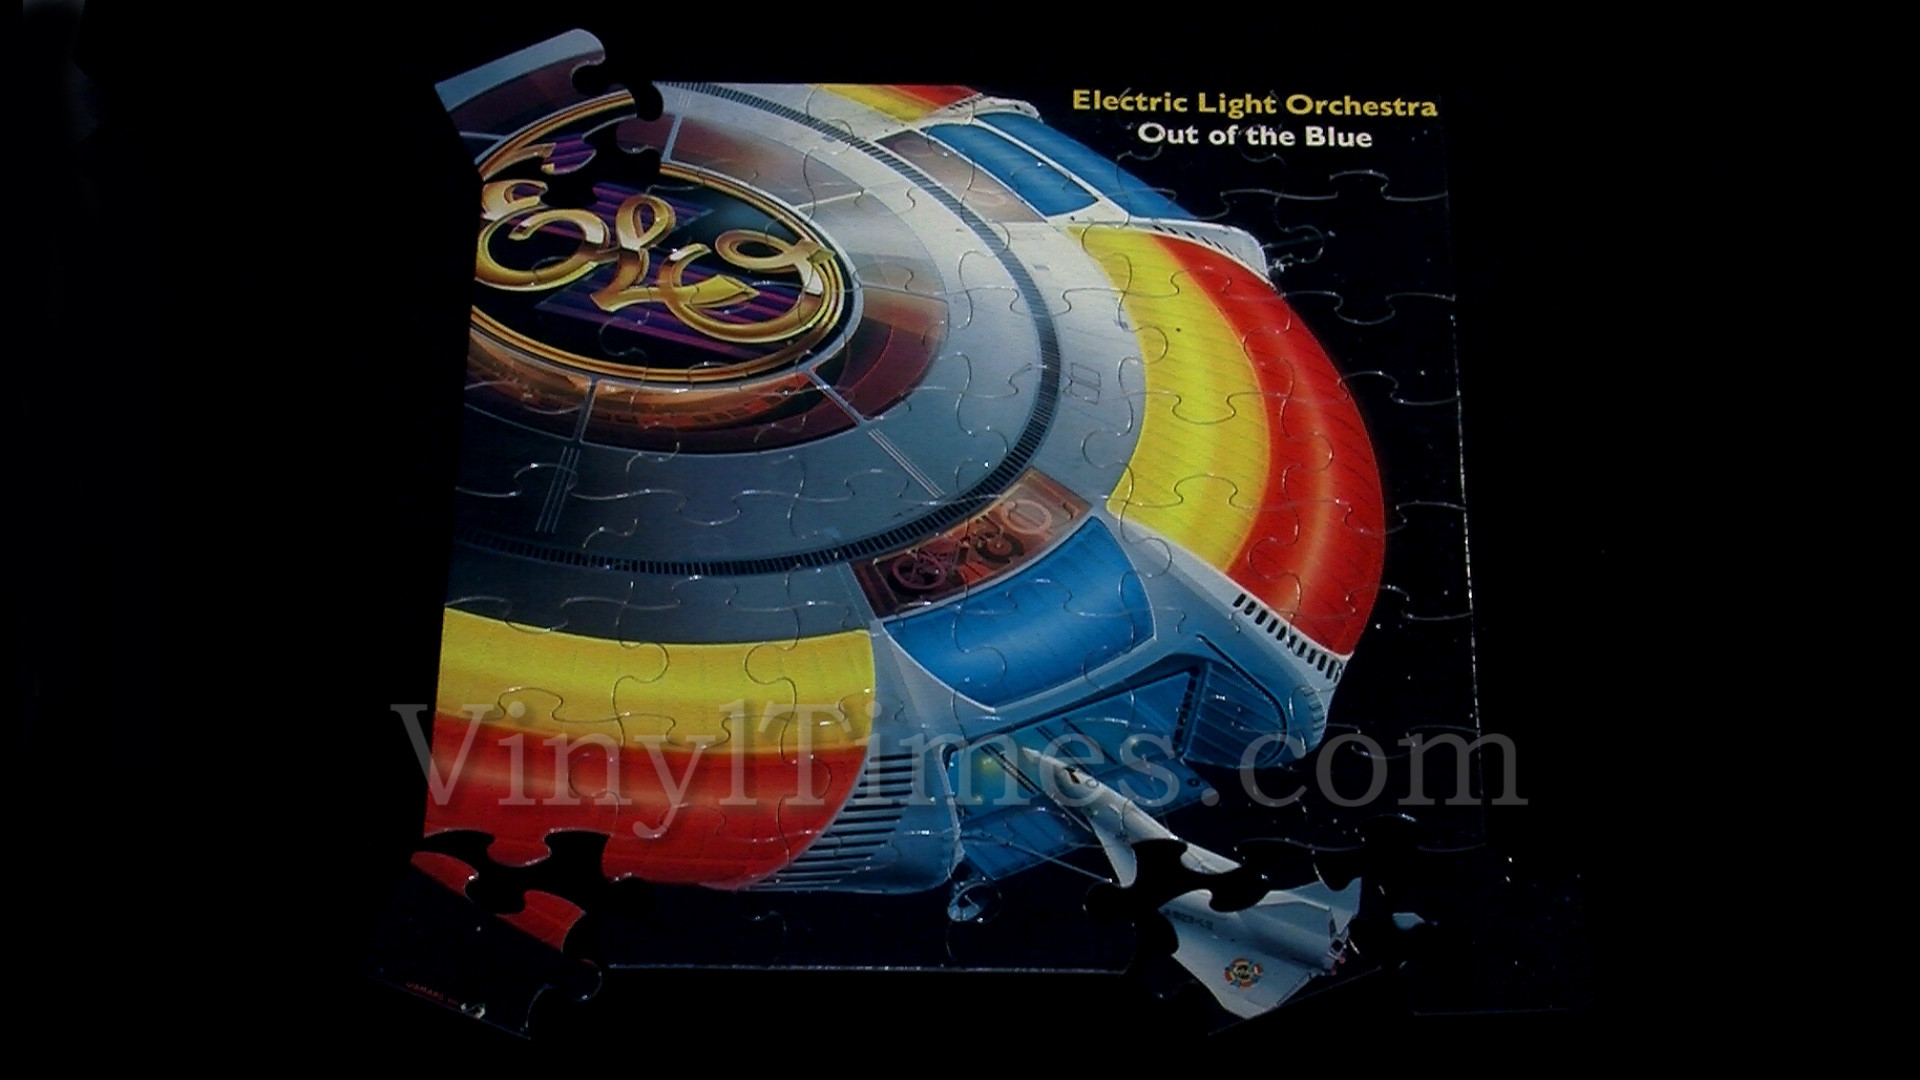 Blue skies electric light orchestra. Electric Light Orchestra out of the Blue 1977. Elo out of the Blue 1977. Electric Light Orchestra катушки. Electric Light Orchestra out of the Blue LP.